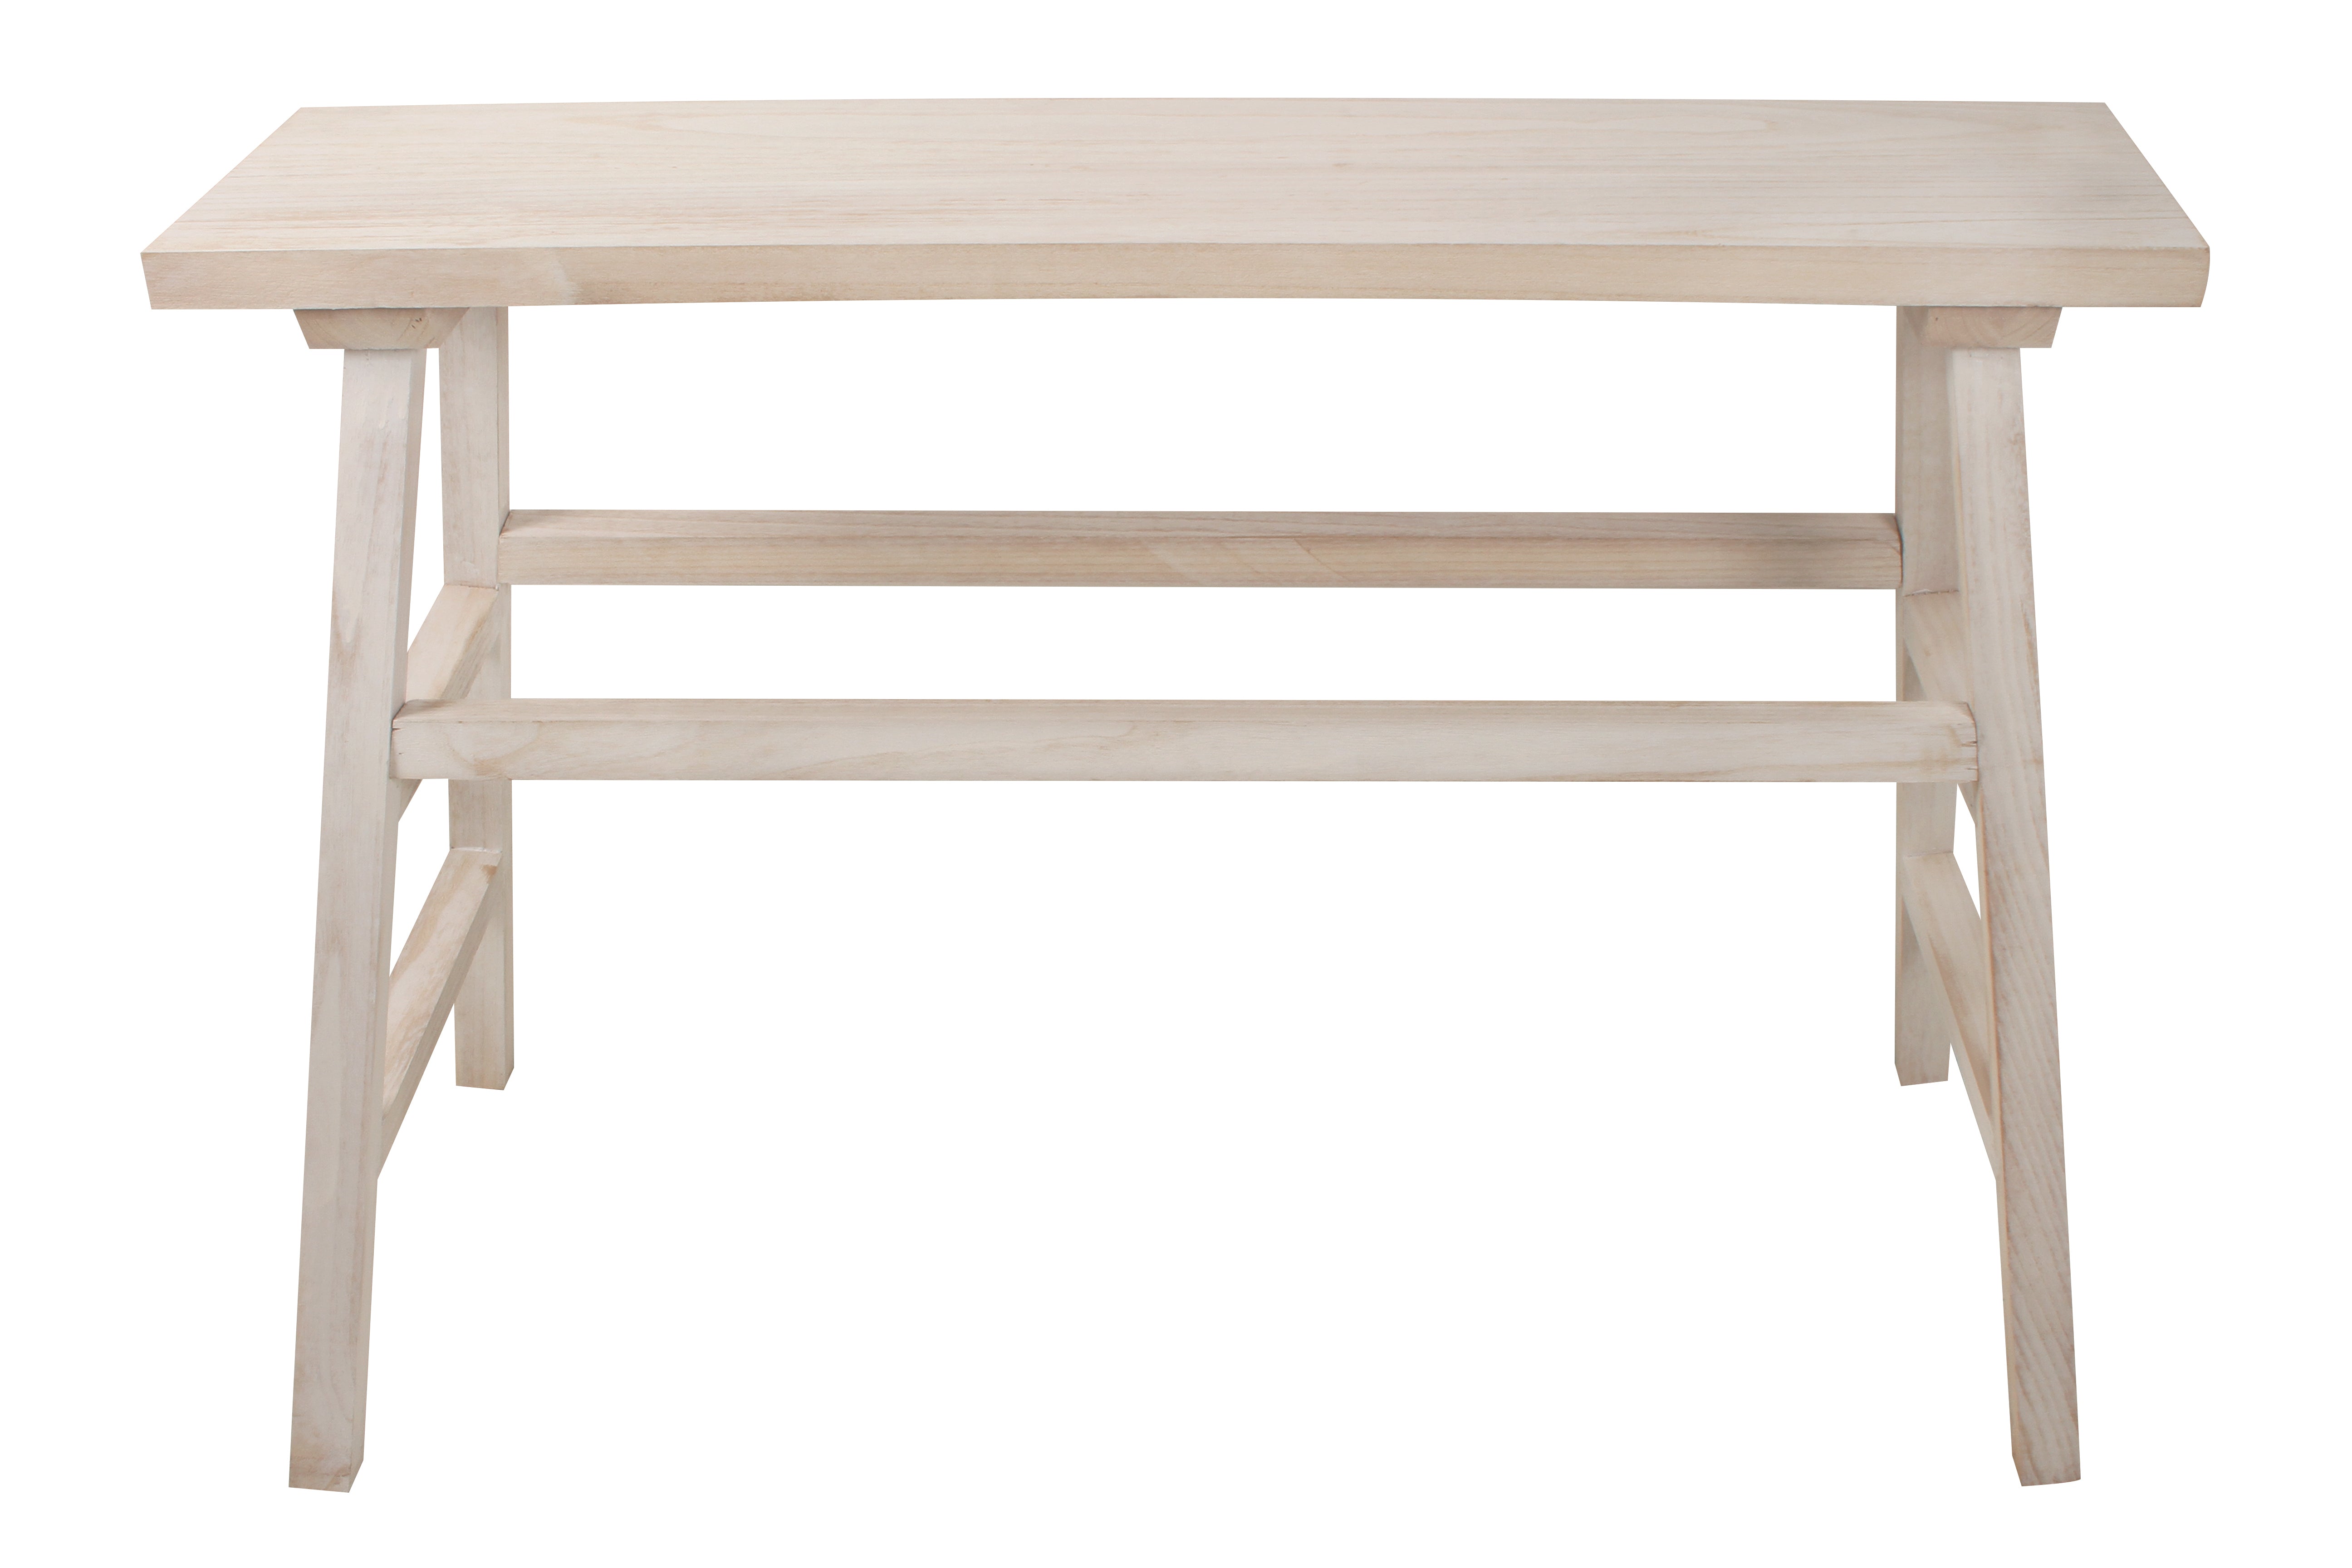 WHITE WASH WOODEN BENCH, TABLE, HALL STAND, KNOCK DOWN 120X85X50CM